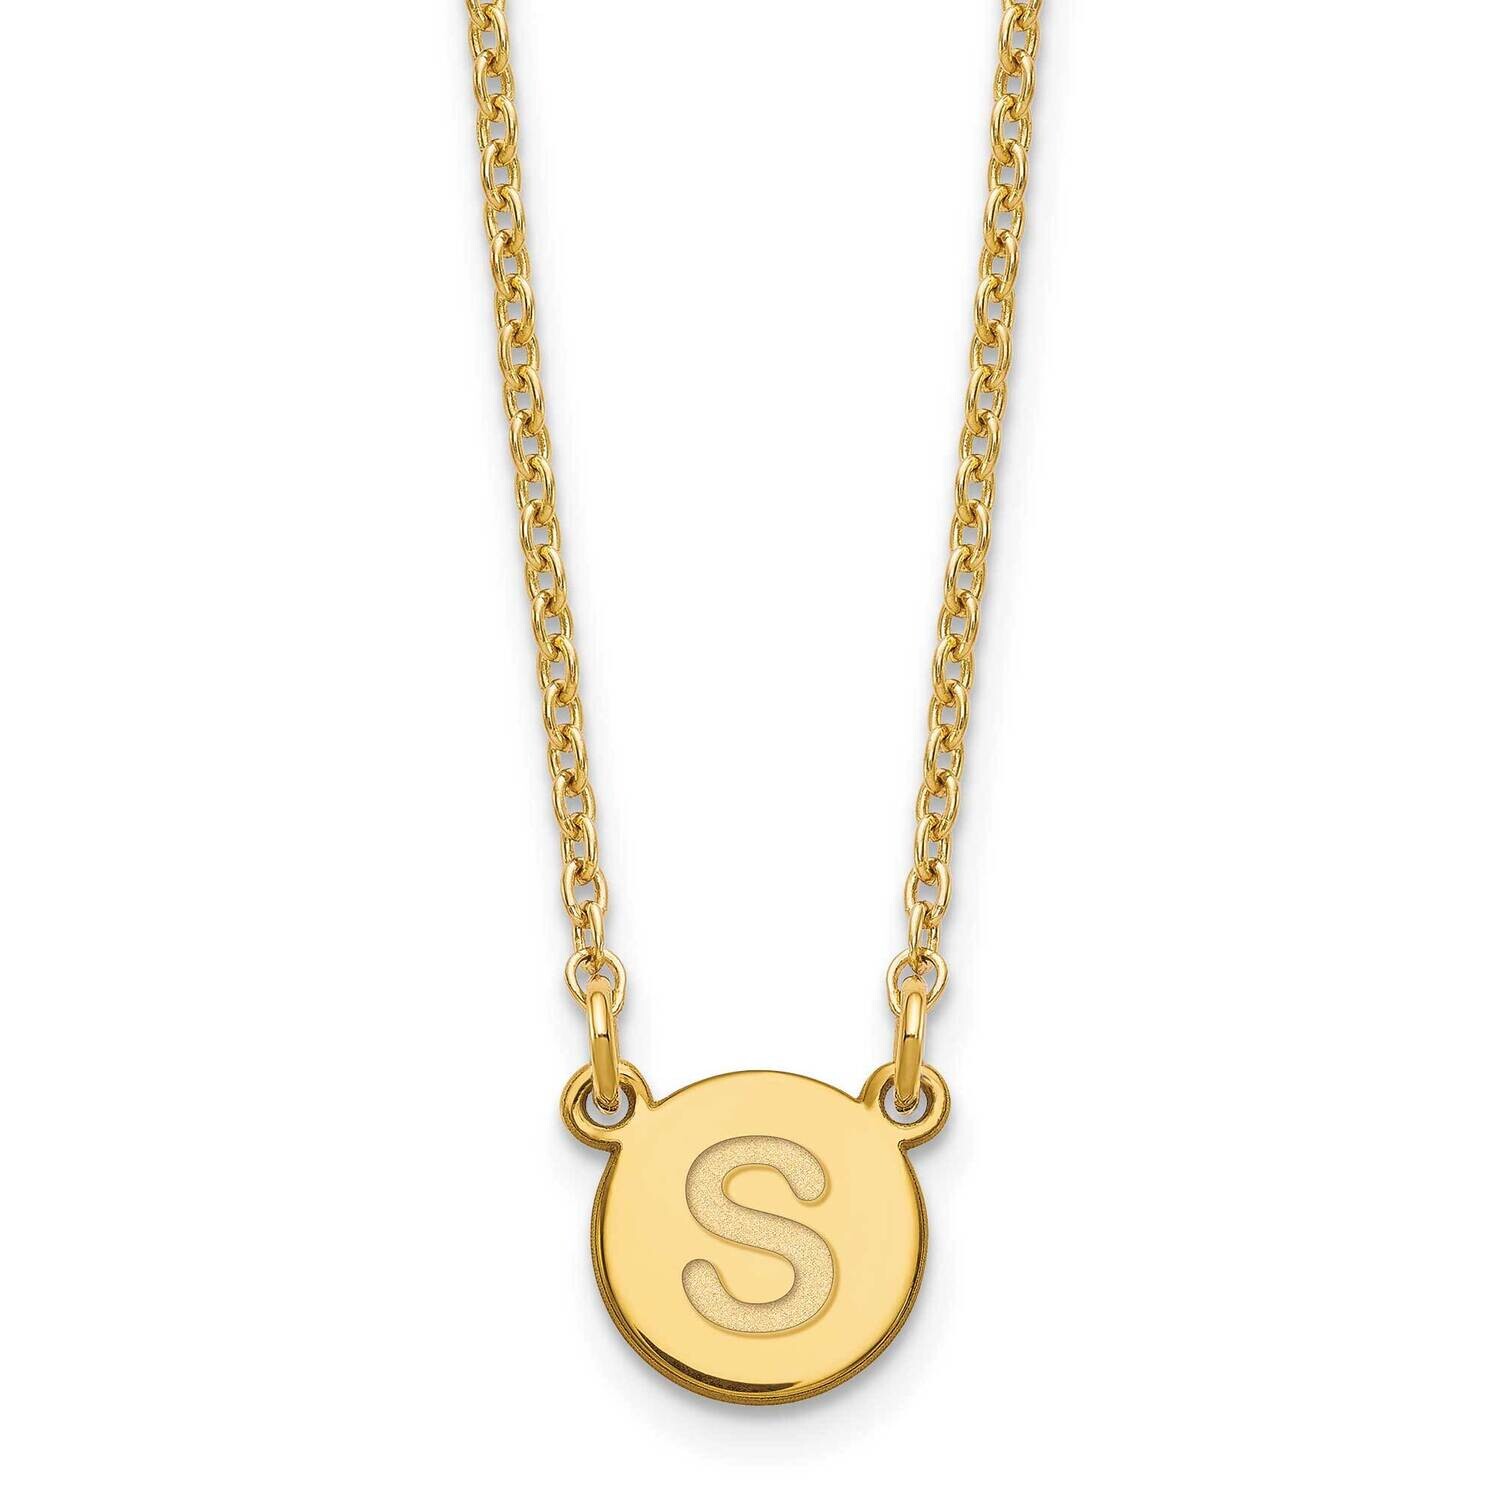 Gold-Plated Tiny Circle Block Letter S Initial Necklace Sterling Silver XNA722GP/S